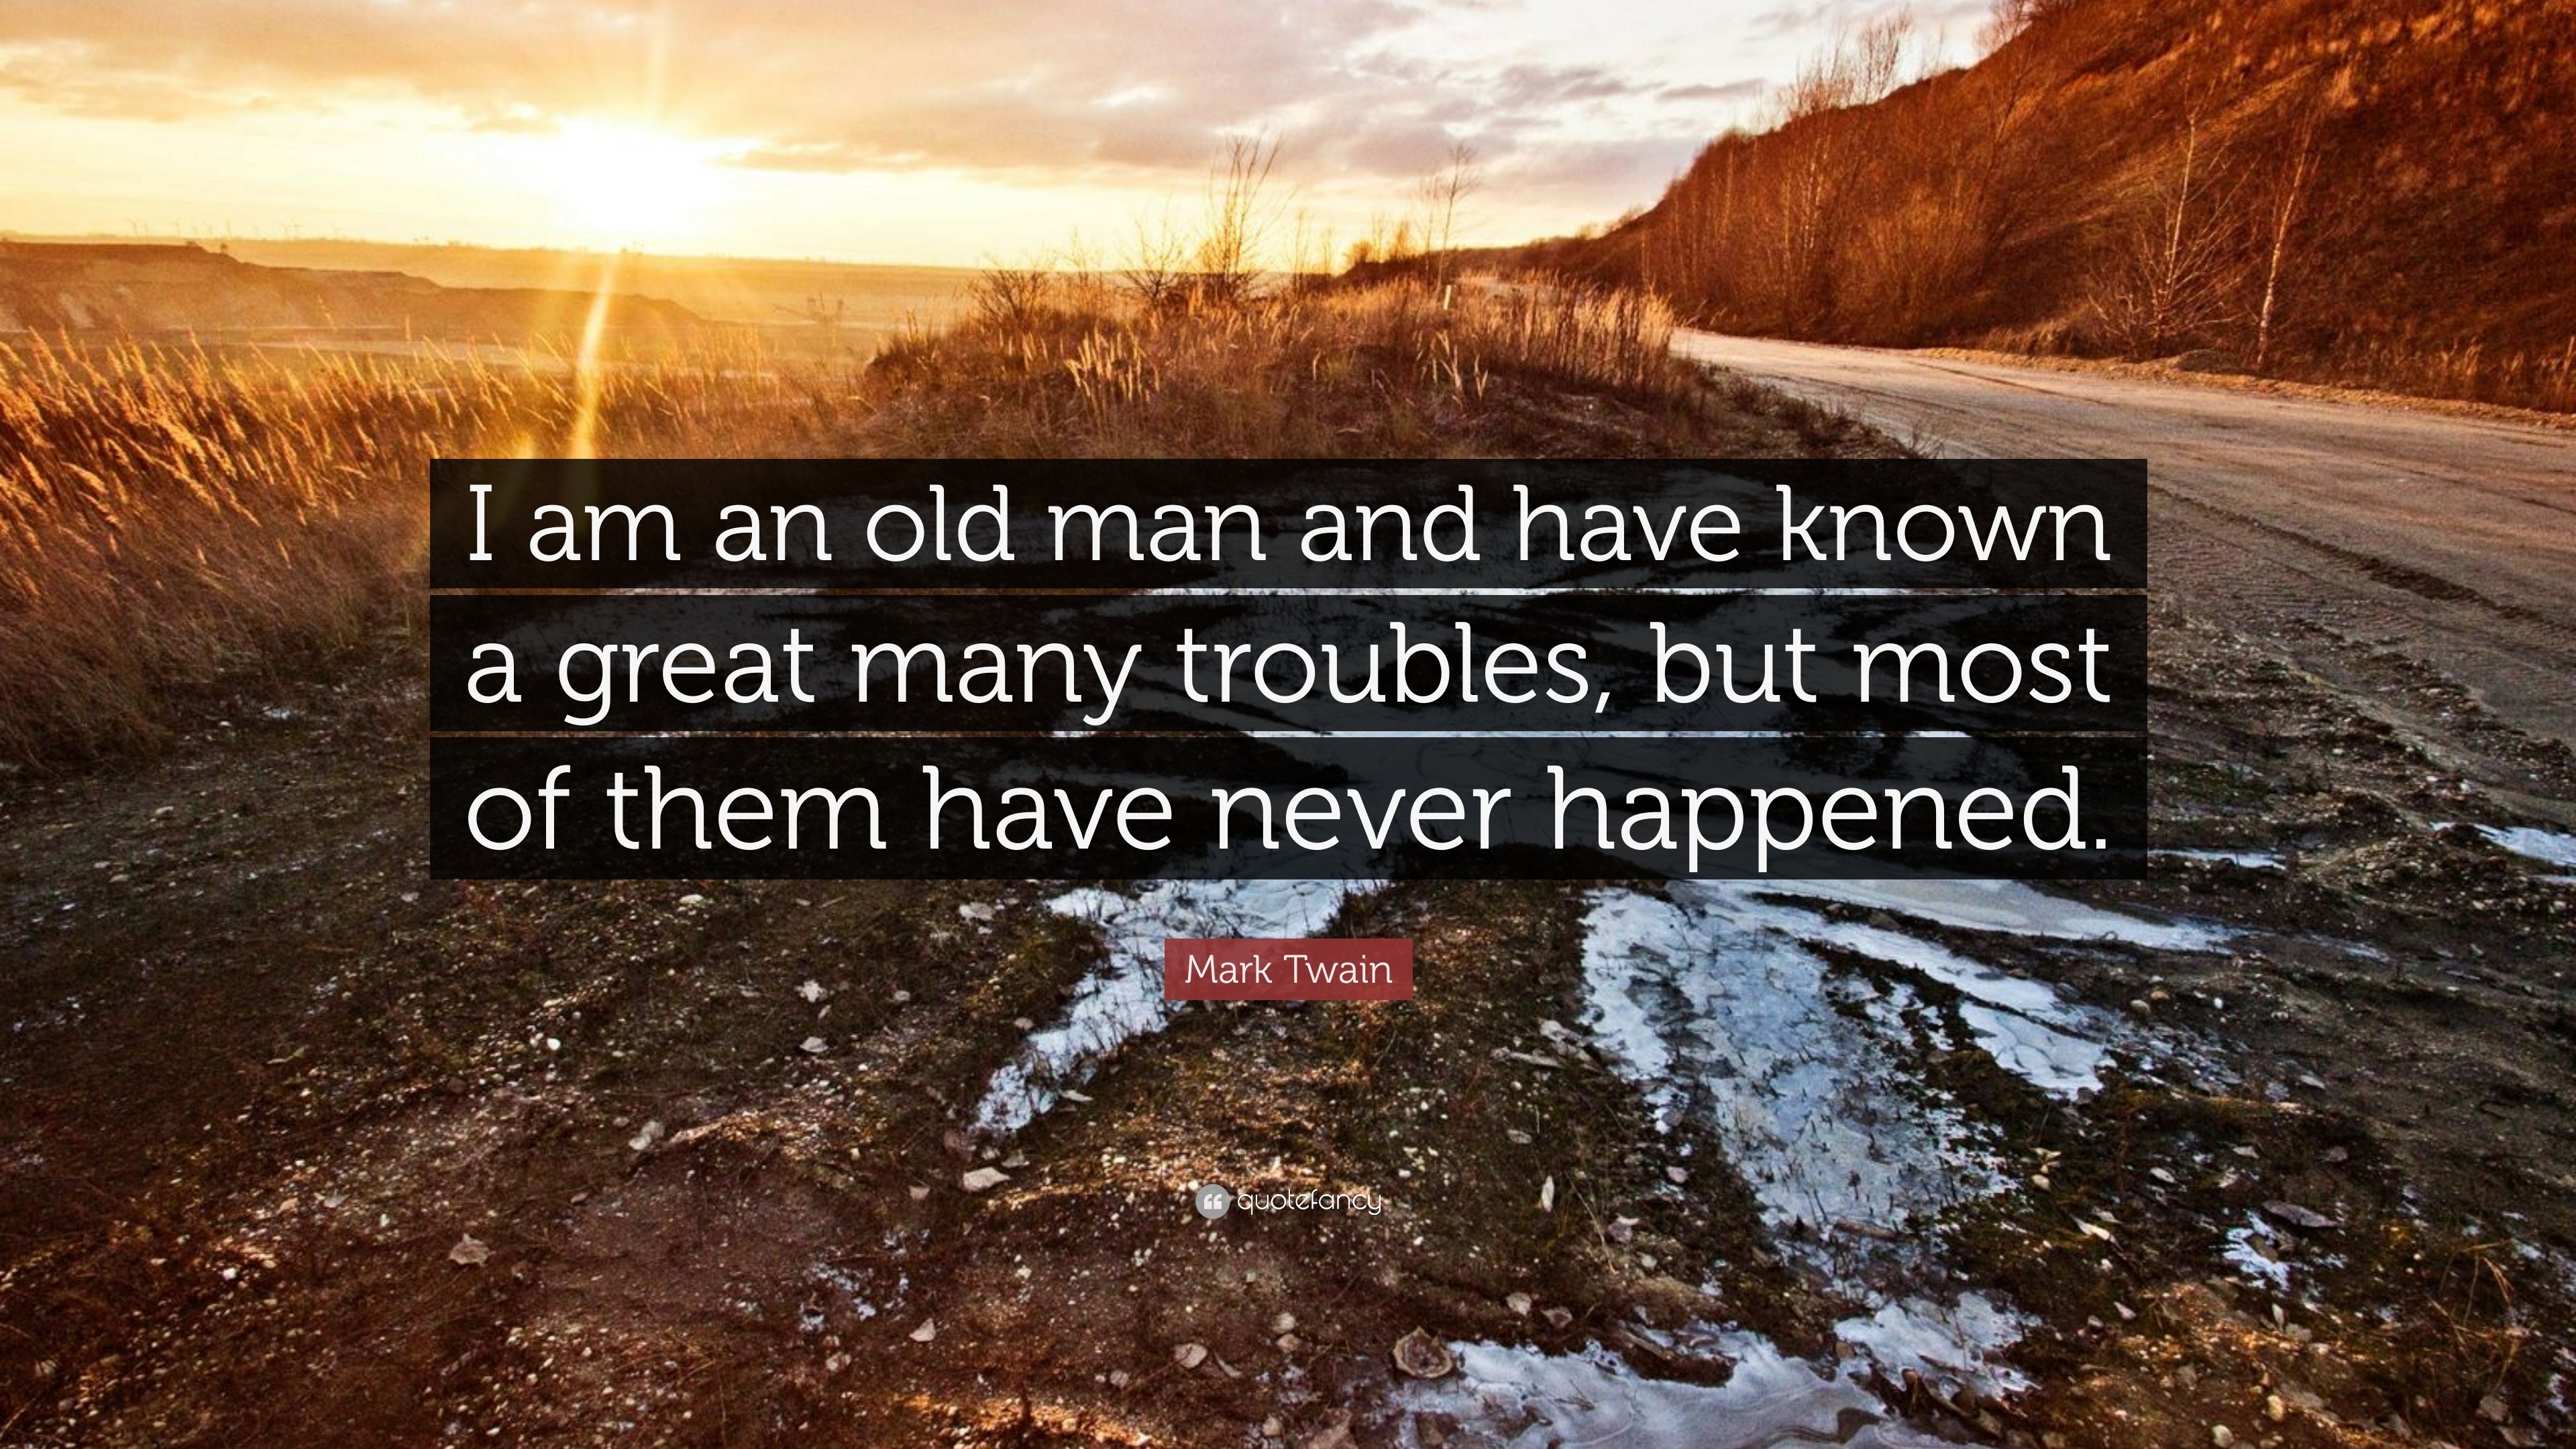 Mark Twain Quote “I am an old man and have known a great many